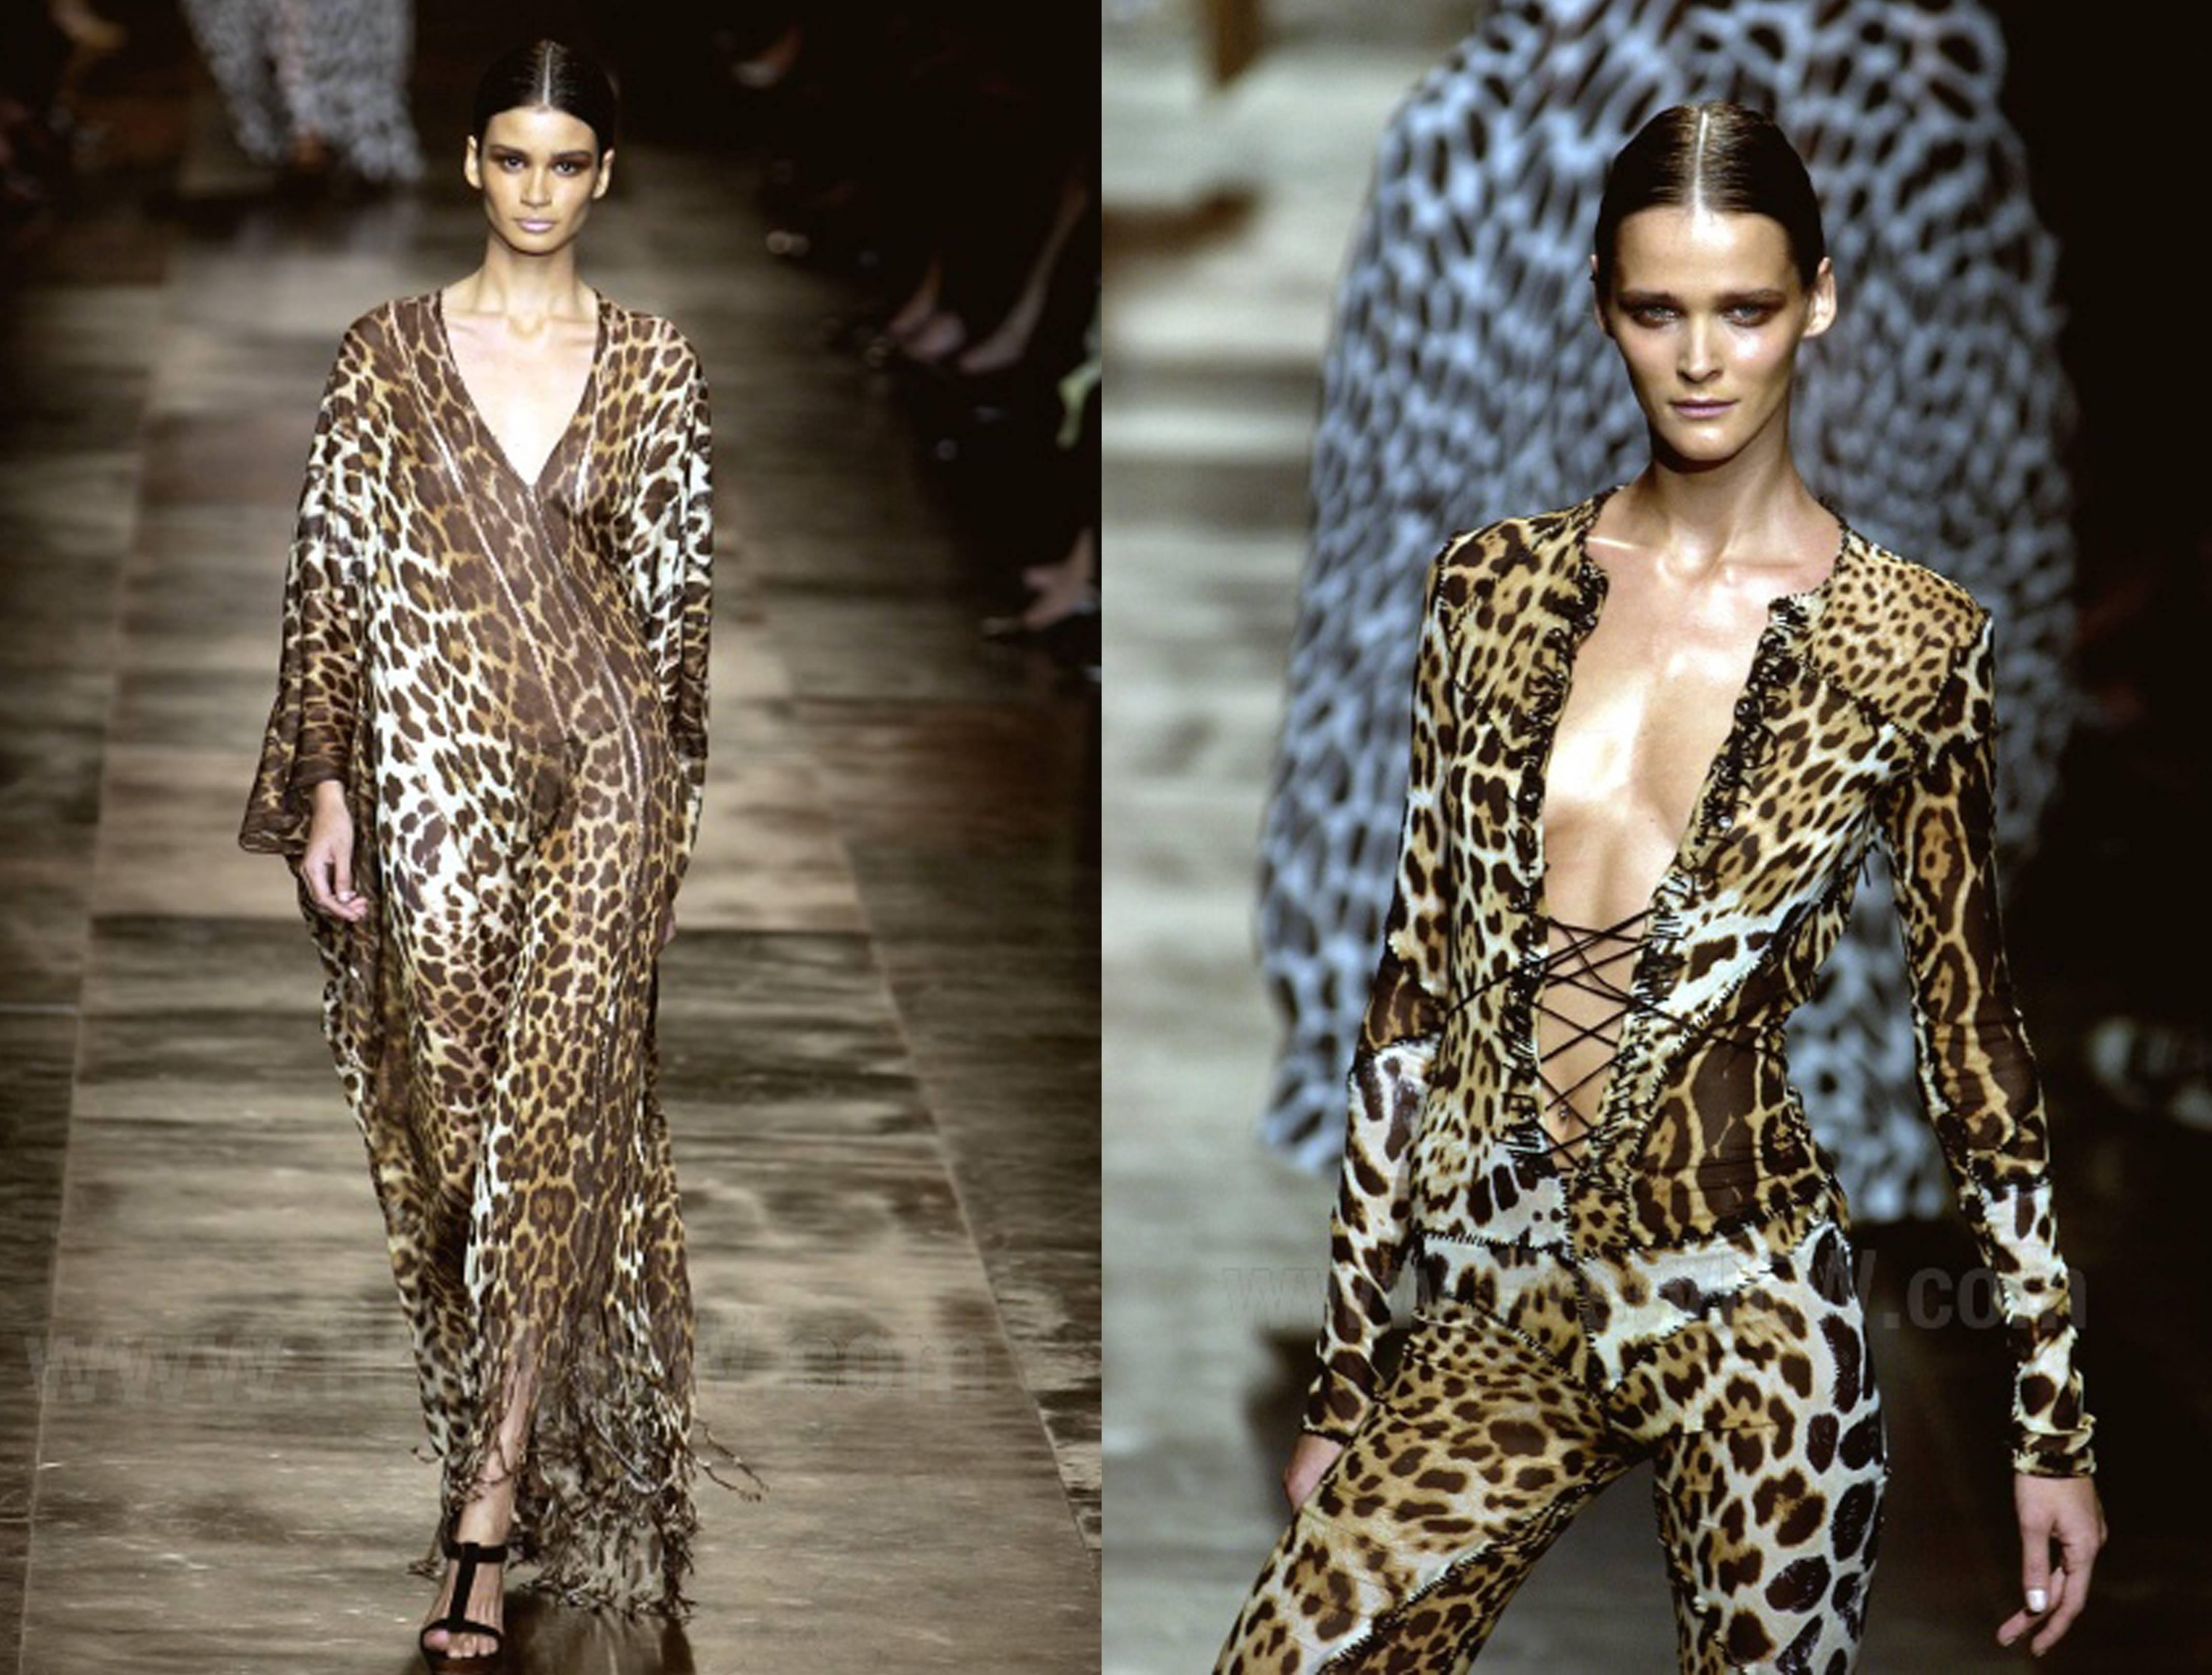 A Yves Saint Laurent leopard print caftan in leopard print, designed by Tom Ford for the Spring/Summer 2002 season. The caftan has pleating around the scoop neck line and a button closure at the rear. There is a slight train at the back giving the